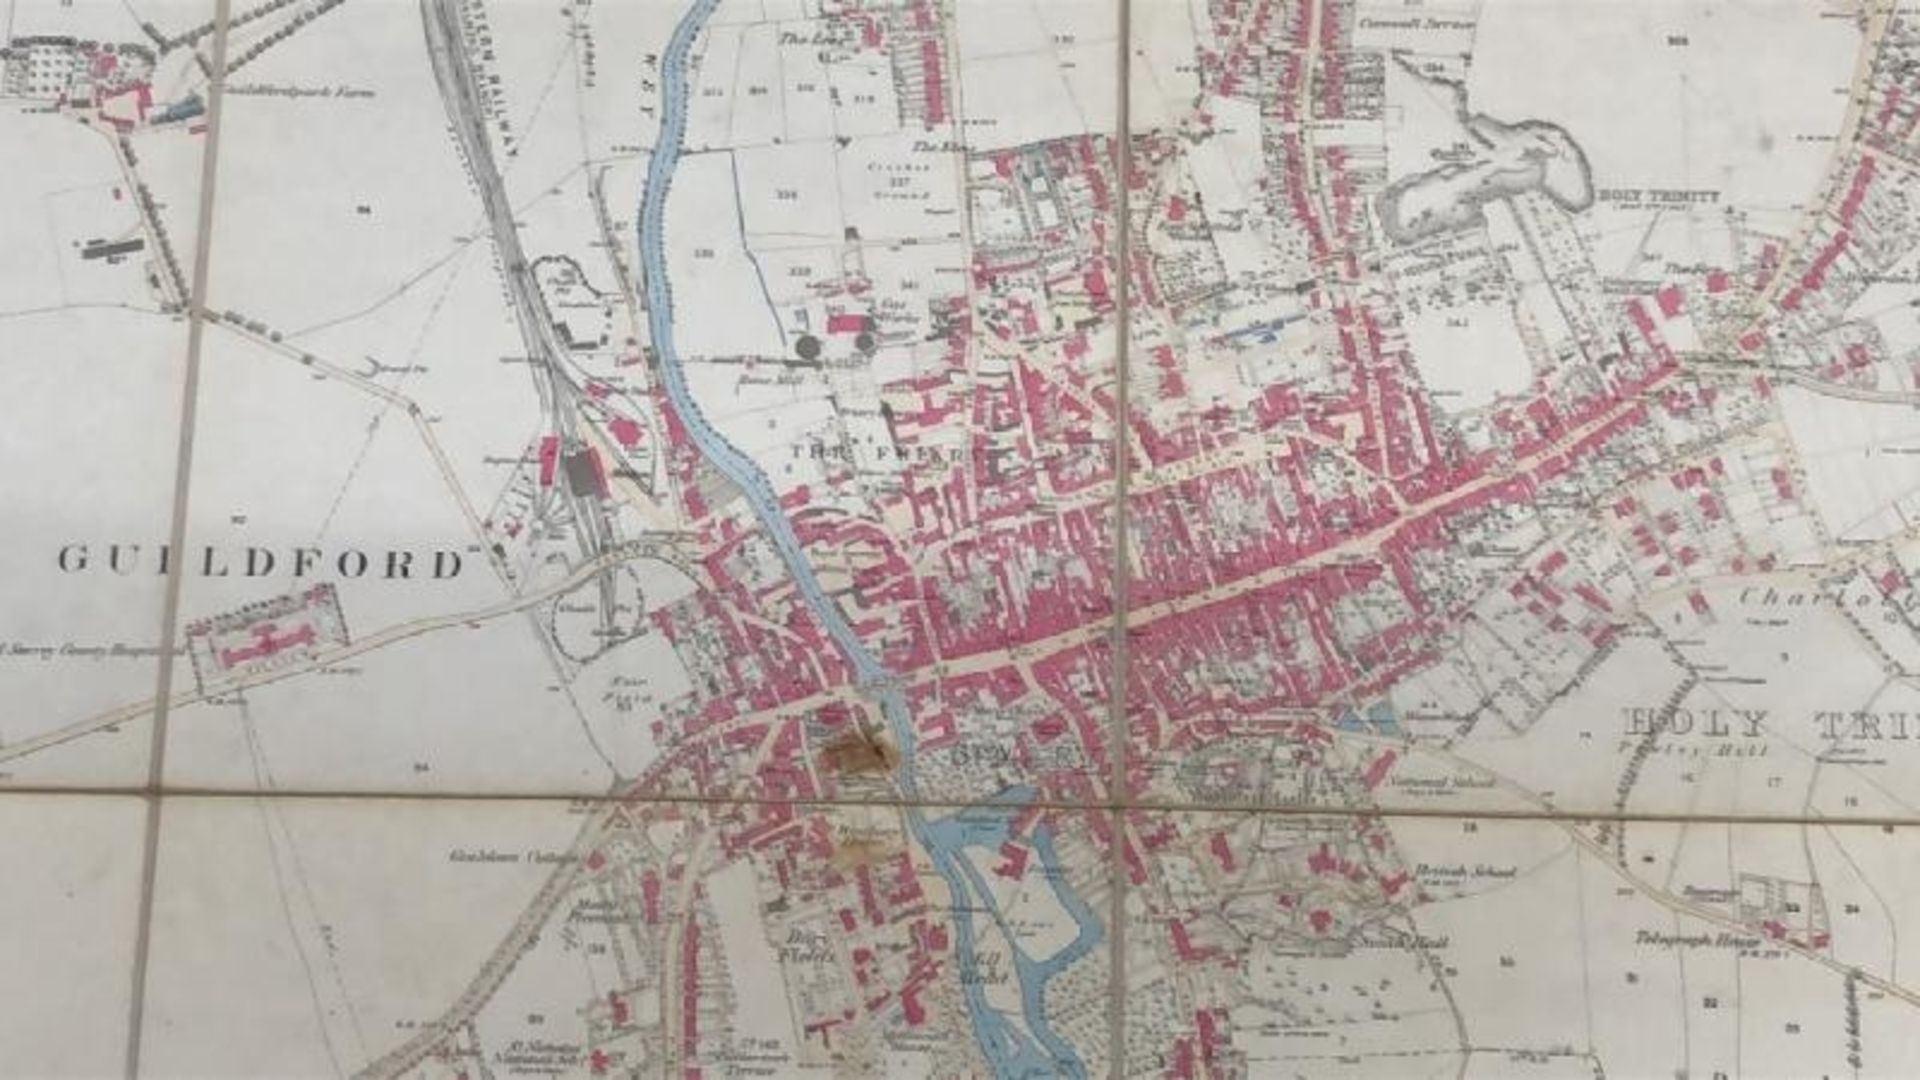 A large 25 inches to 1 mile scale map of Guildford, surveyed in 1827, 202.5cm x 134.5cm opened, - Image 5 of 16